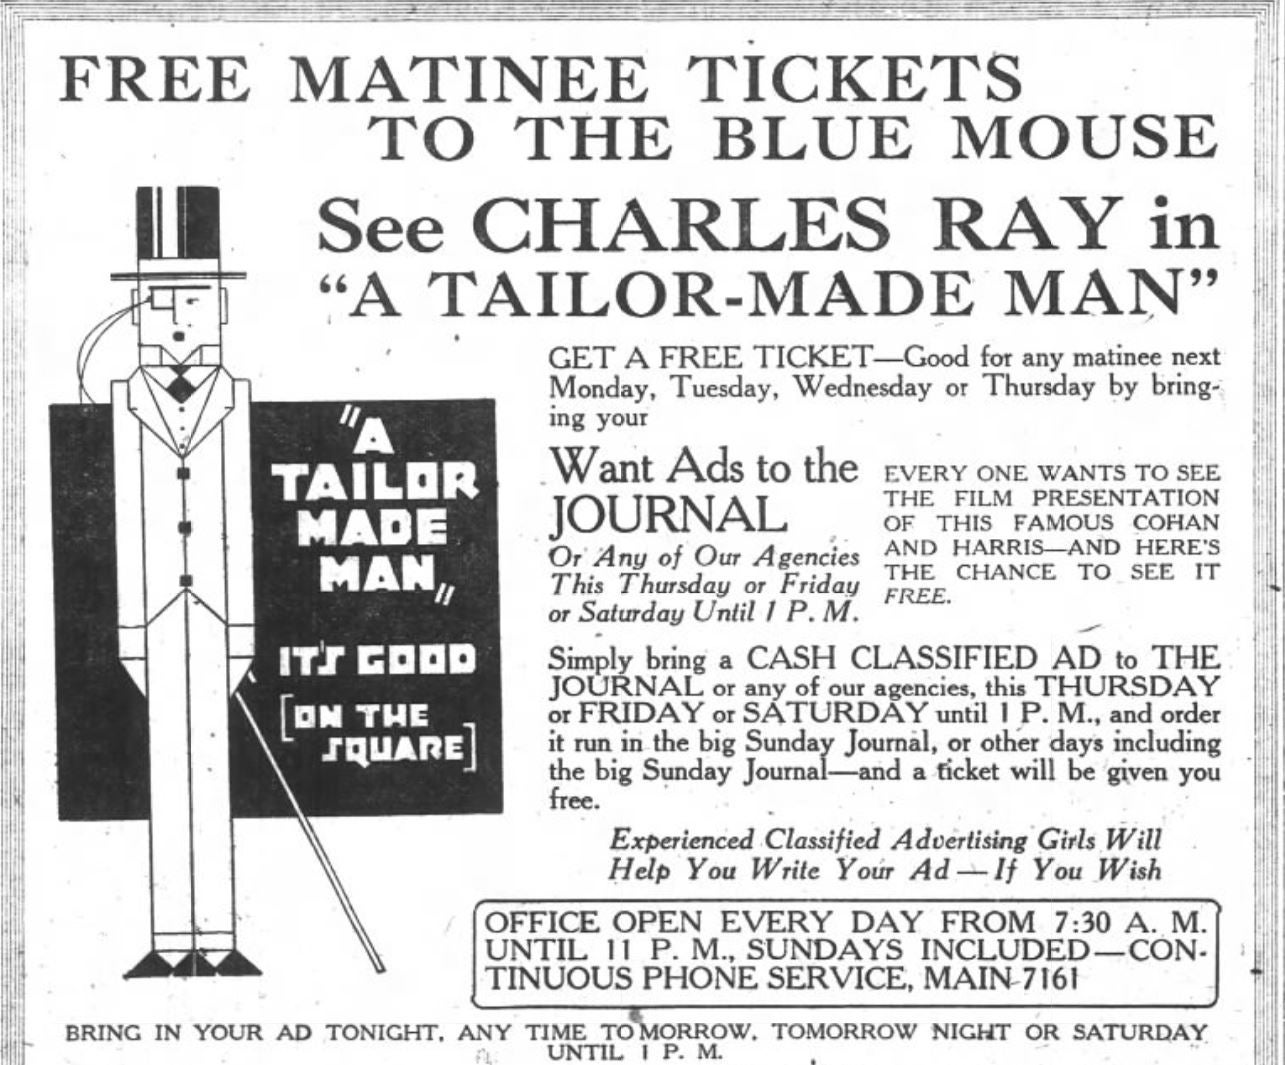 Advertisement for the Blue Mouse Theater from The Oregon Daily Journal, in 1922, addressing the promotion the theater is holding for free matinee tickets through the newspapers ad service